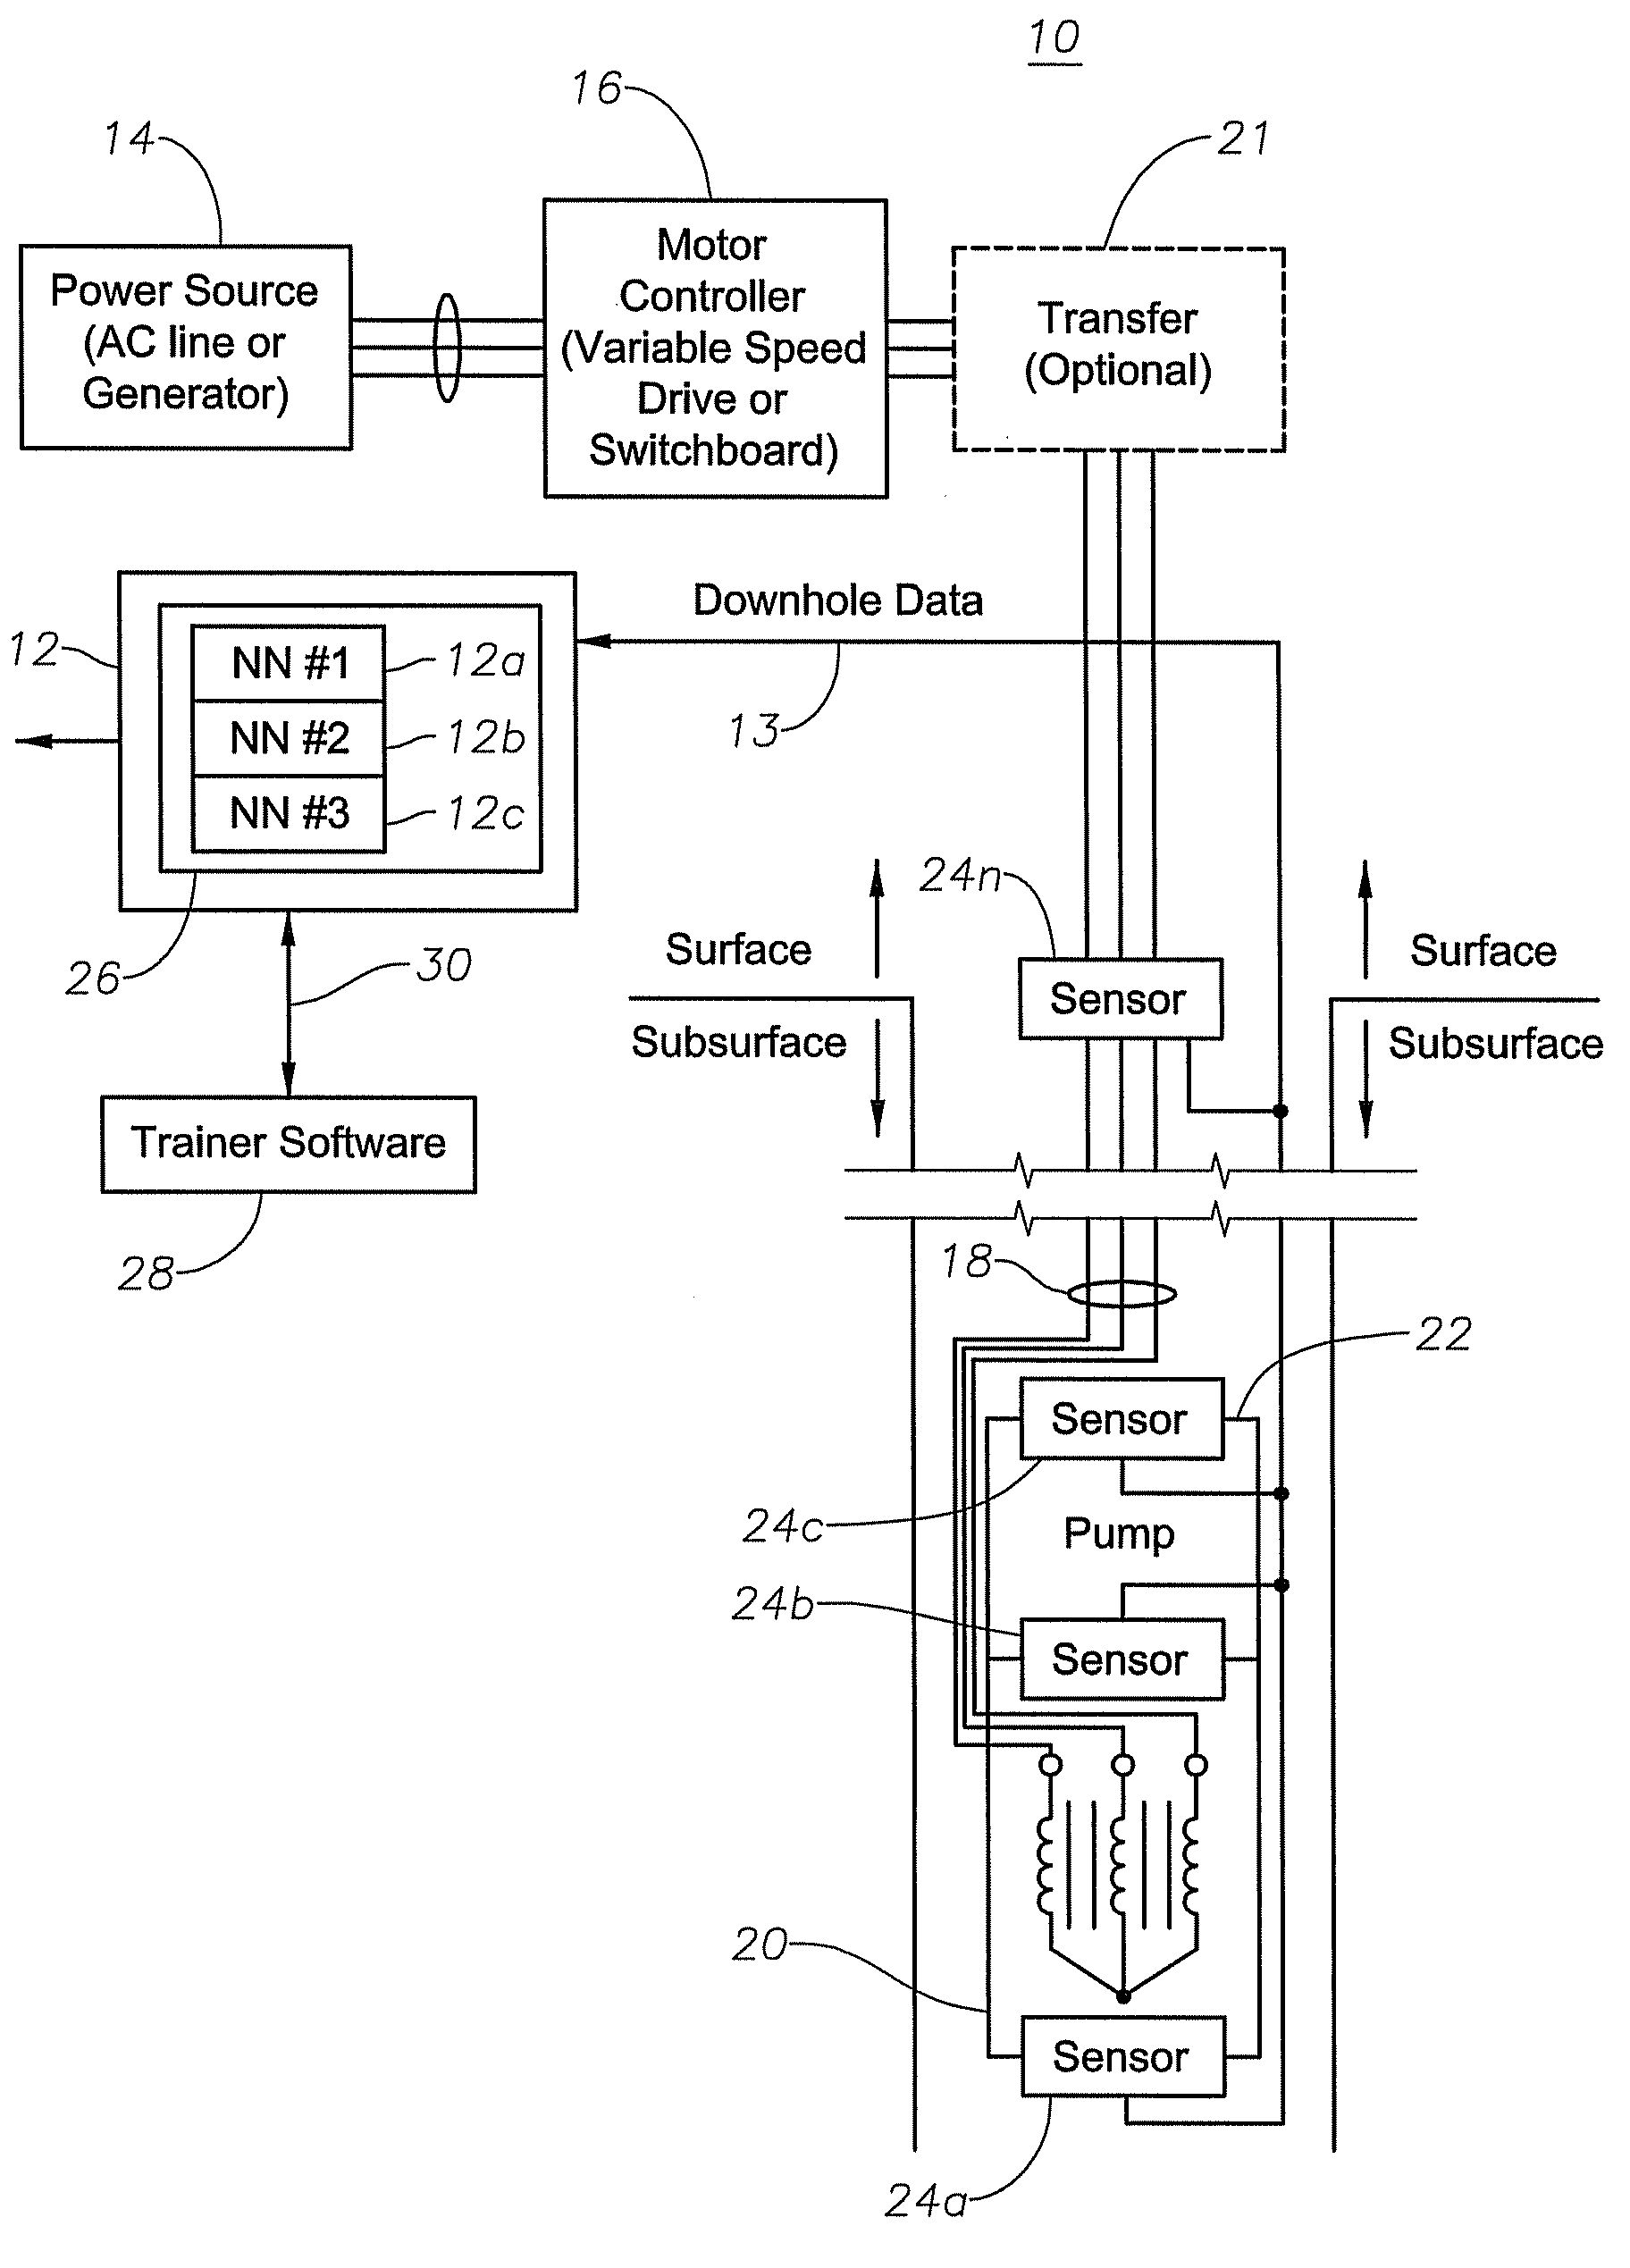 Multiphase flow meter for electrical submersible pumps using artificial neural networks